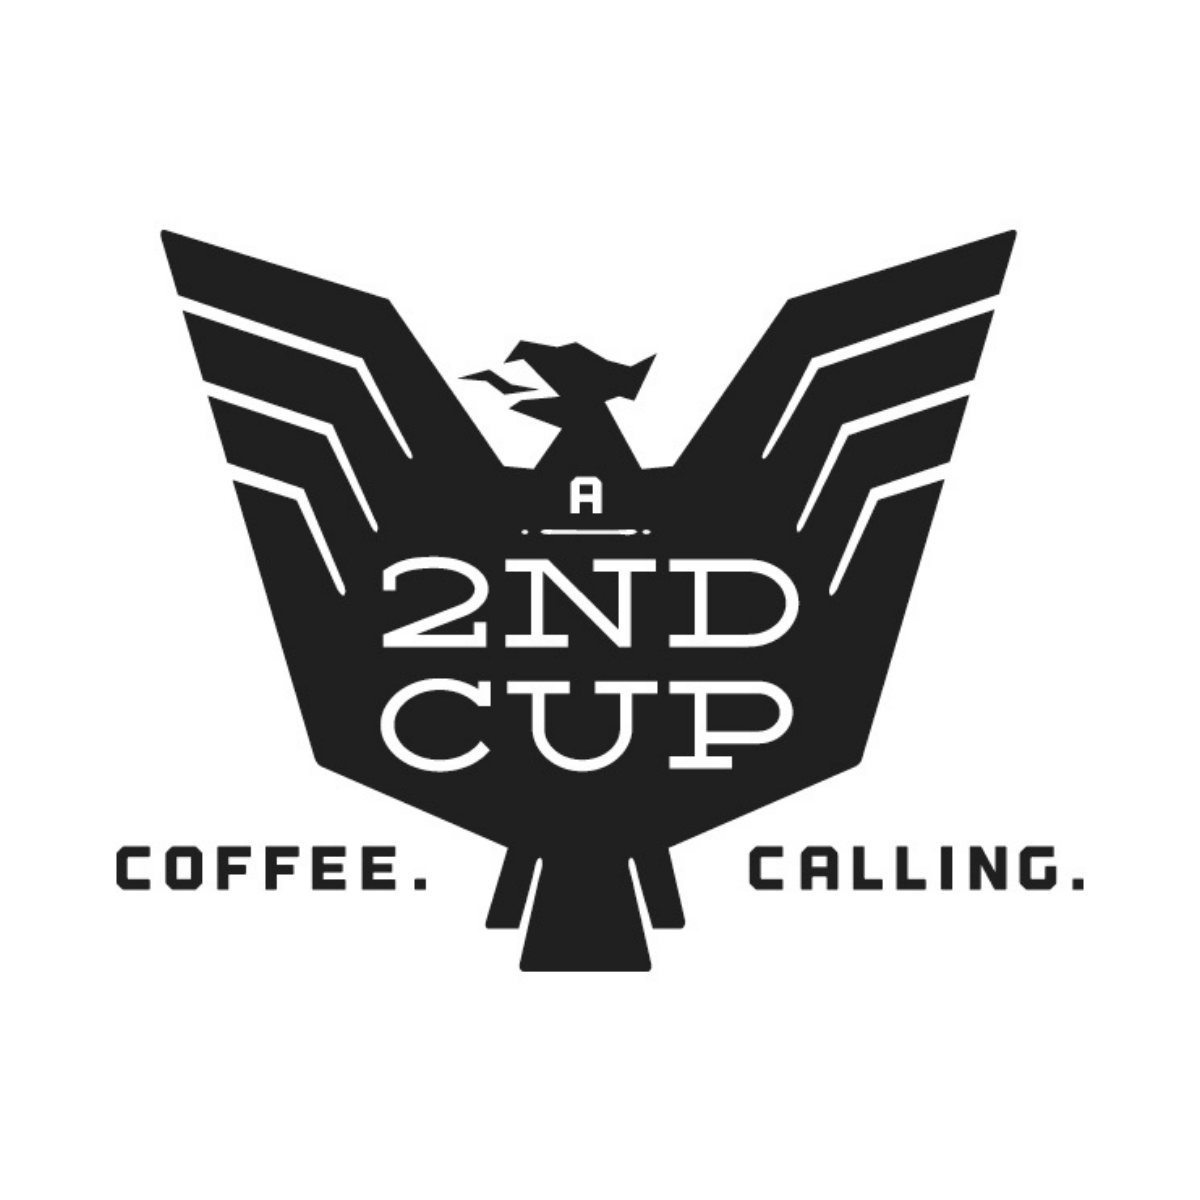 A 2nd Cup